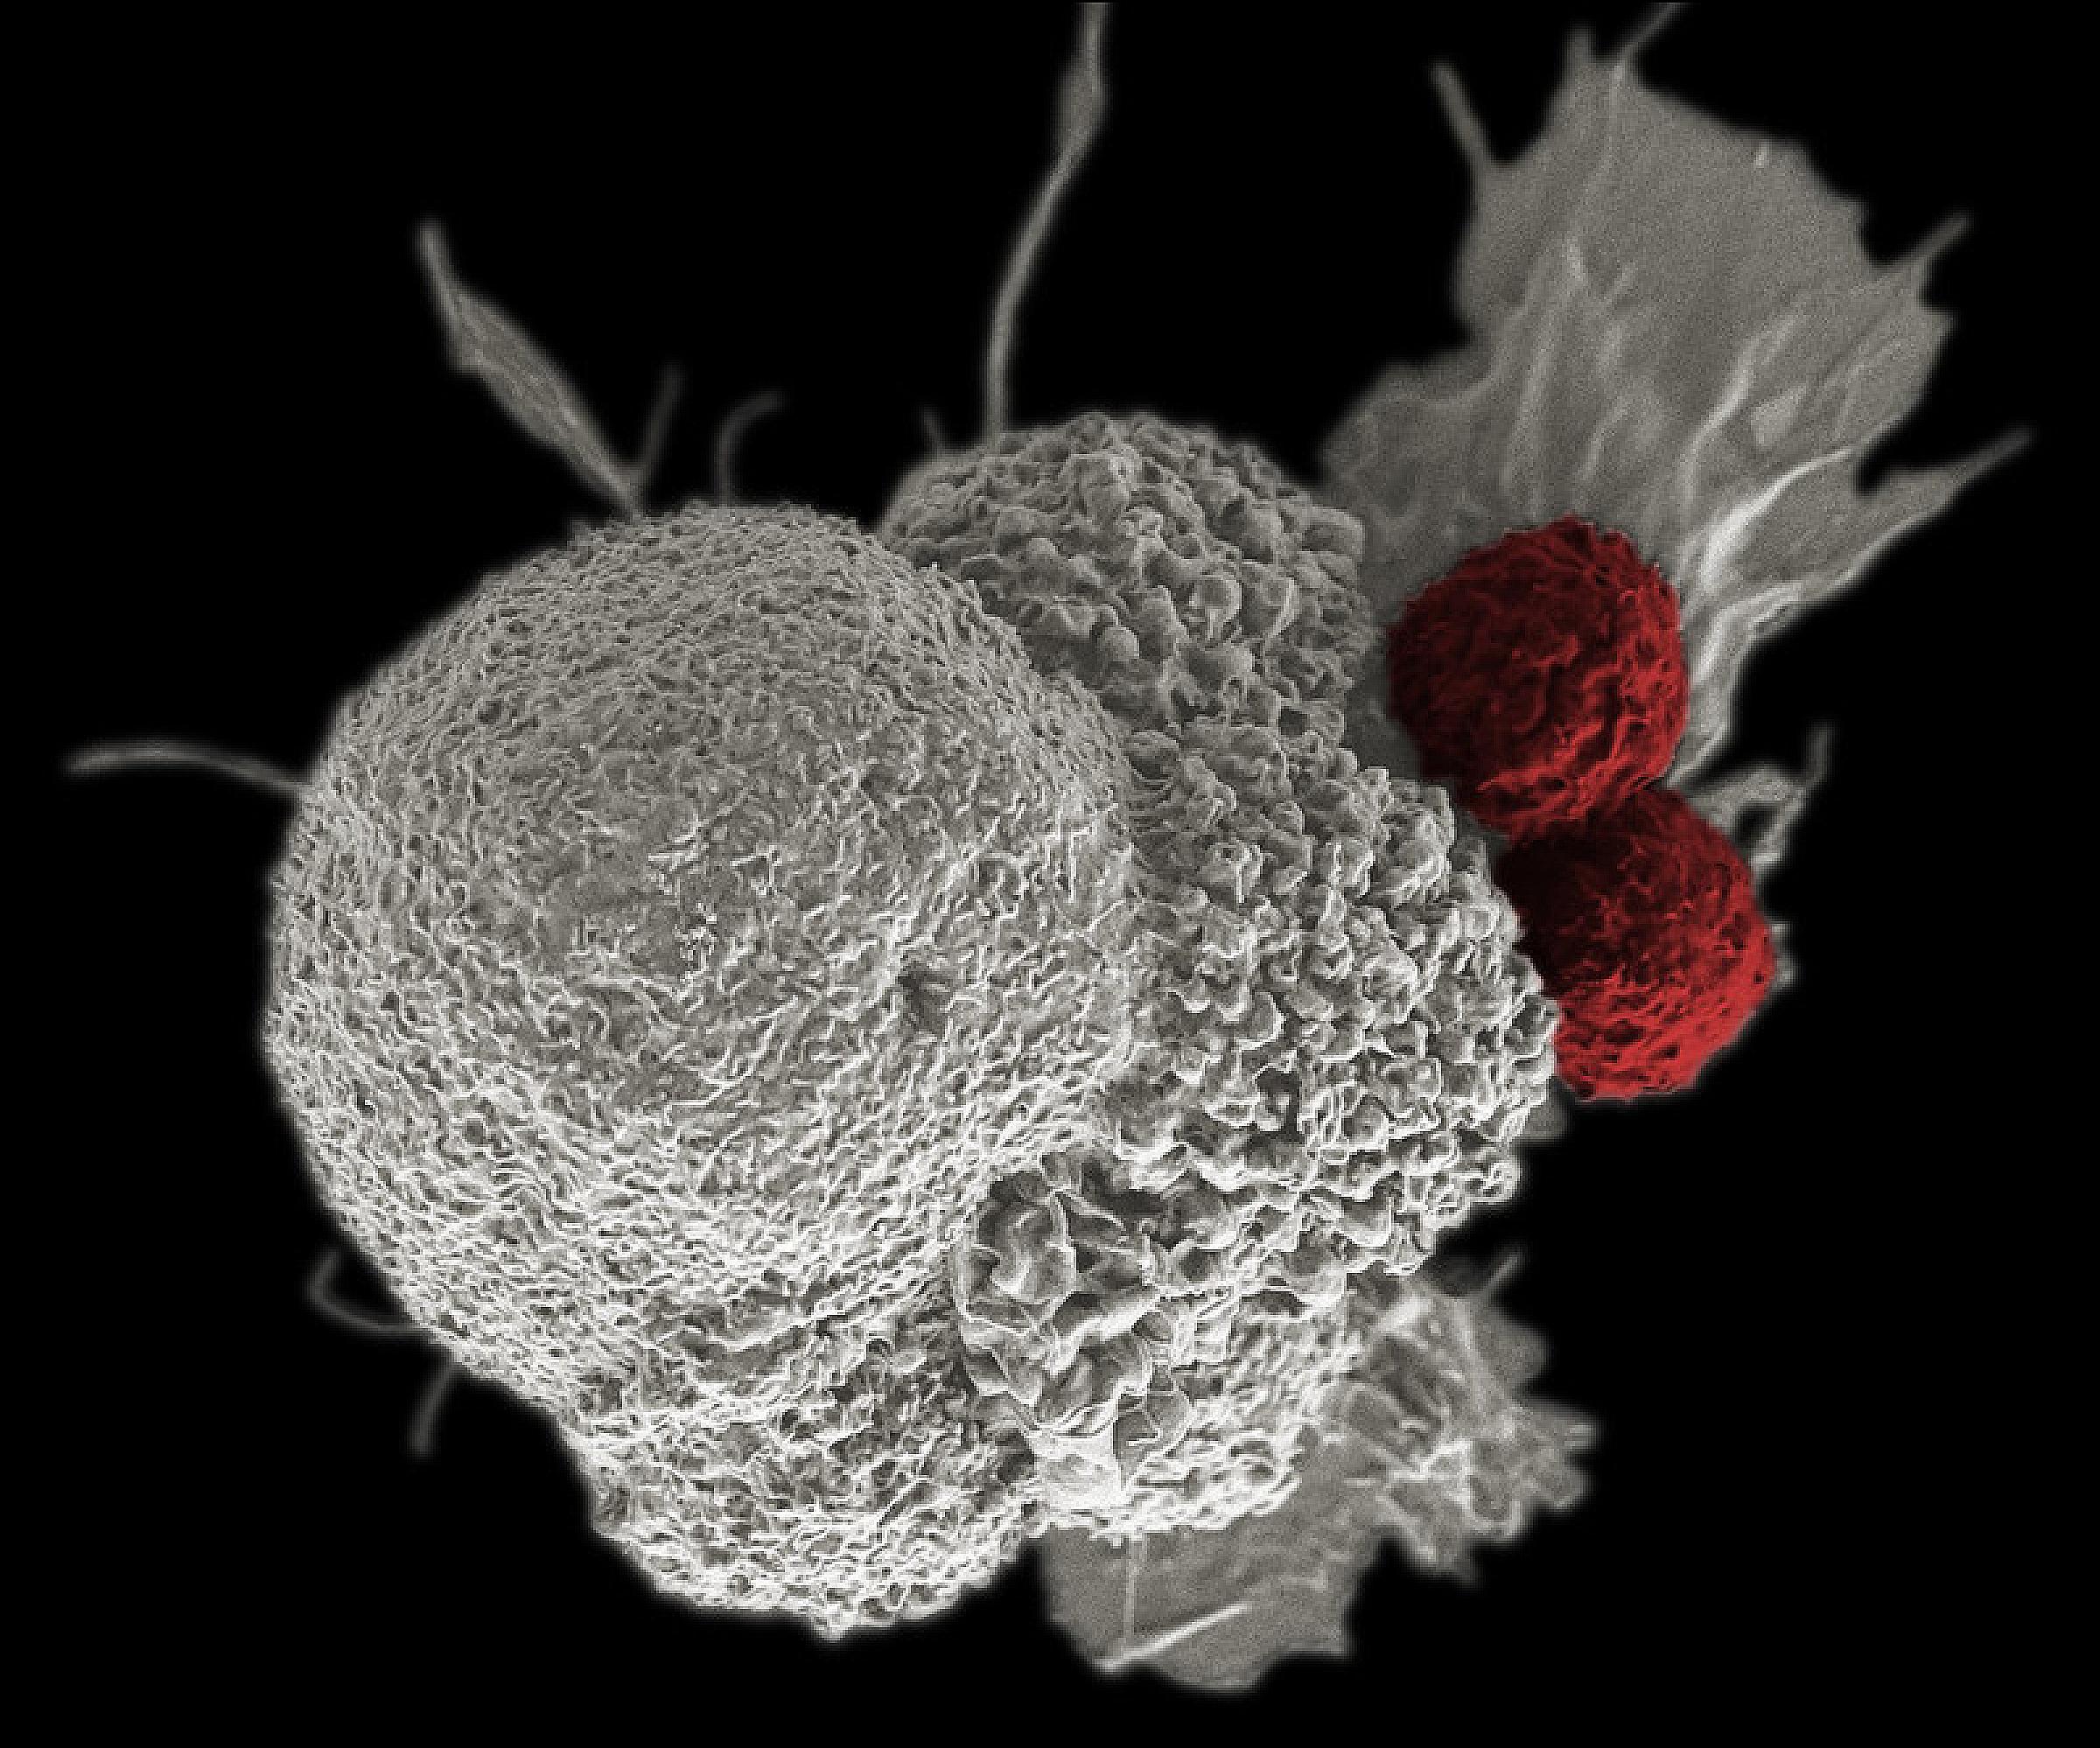 Cancer immunotherapy on a cell level